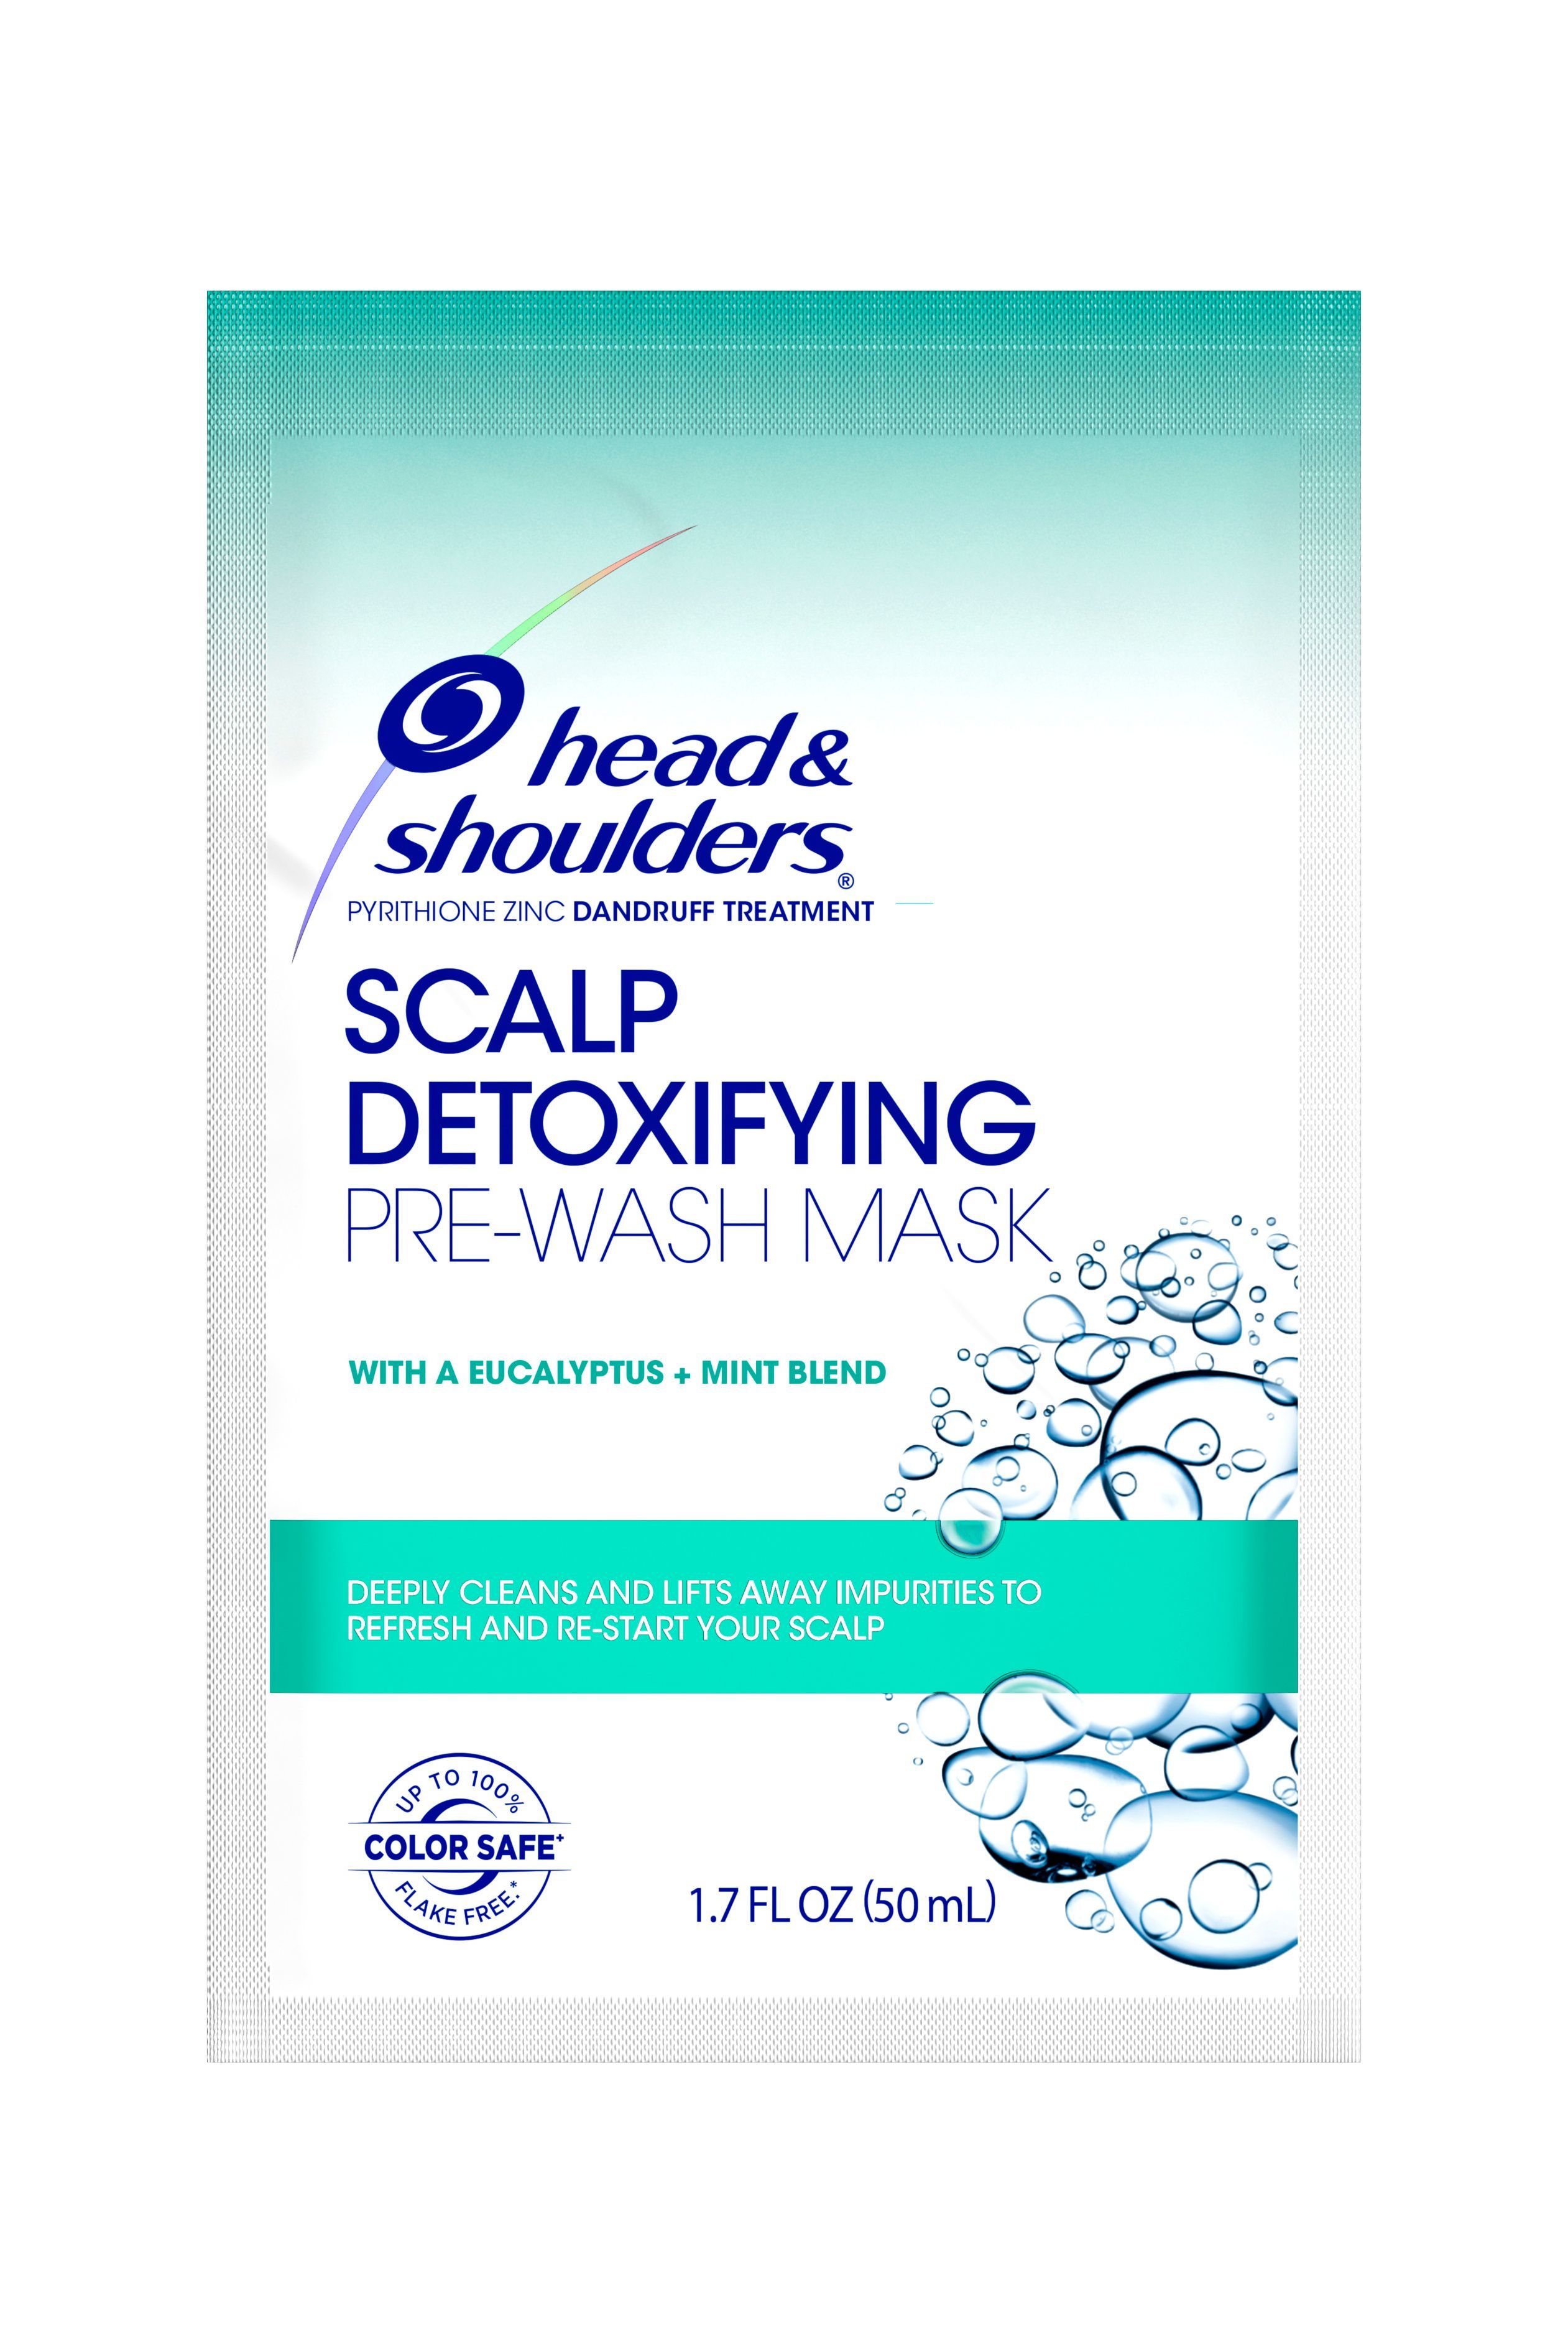 Scalp Detoxifying Pre-Wash Mask with Eucalyptus and Mint